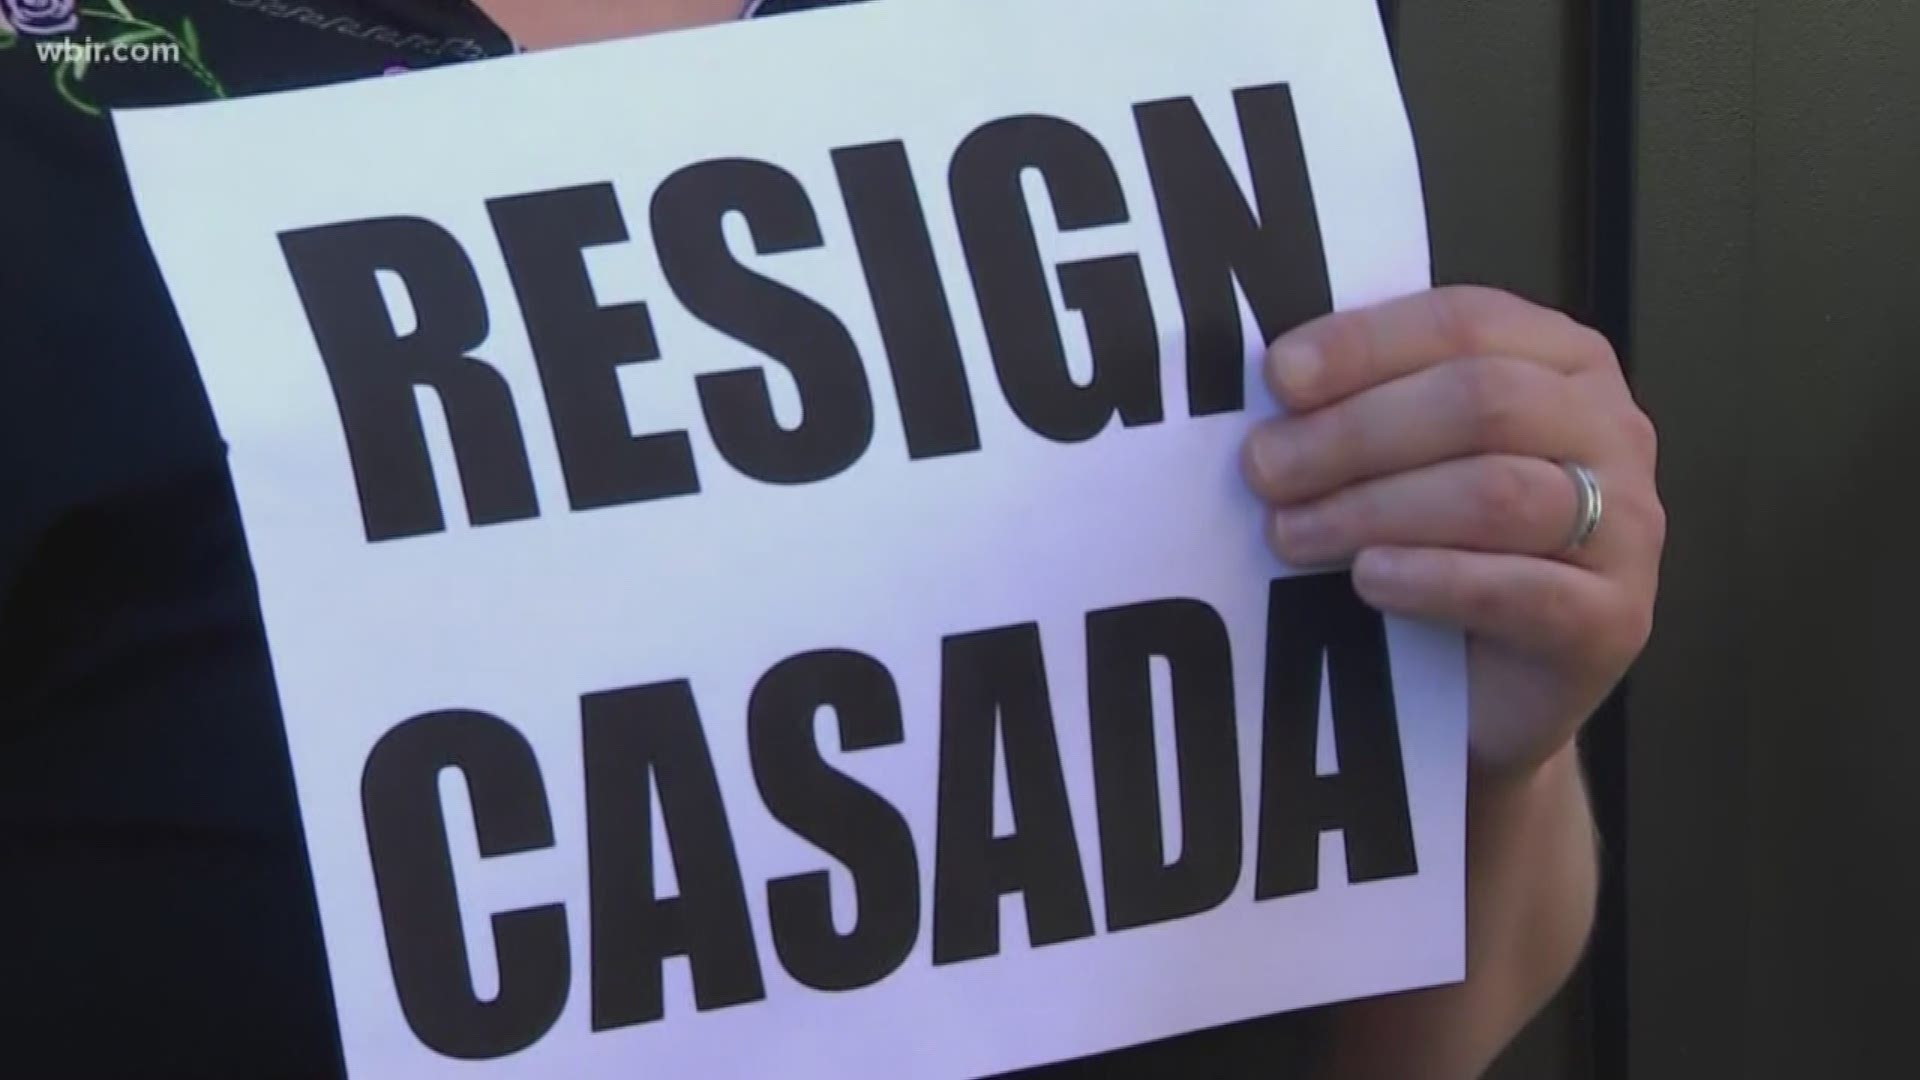 The speaker said he plans to address the members of his party and answer their questions, but did not seem to show any signs of stepping down, despite calls to resign.  Casada is at the center of several scandals, including sending inappropriate text messages.